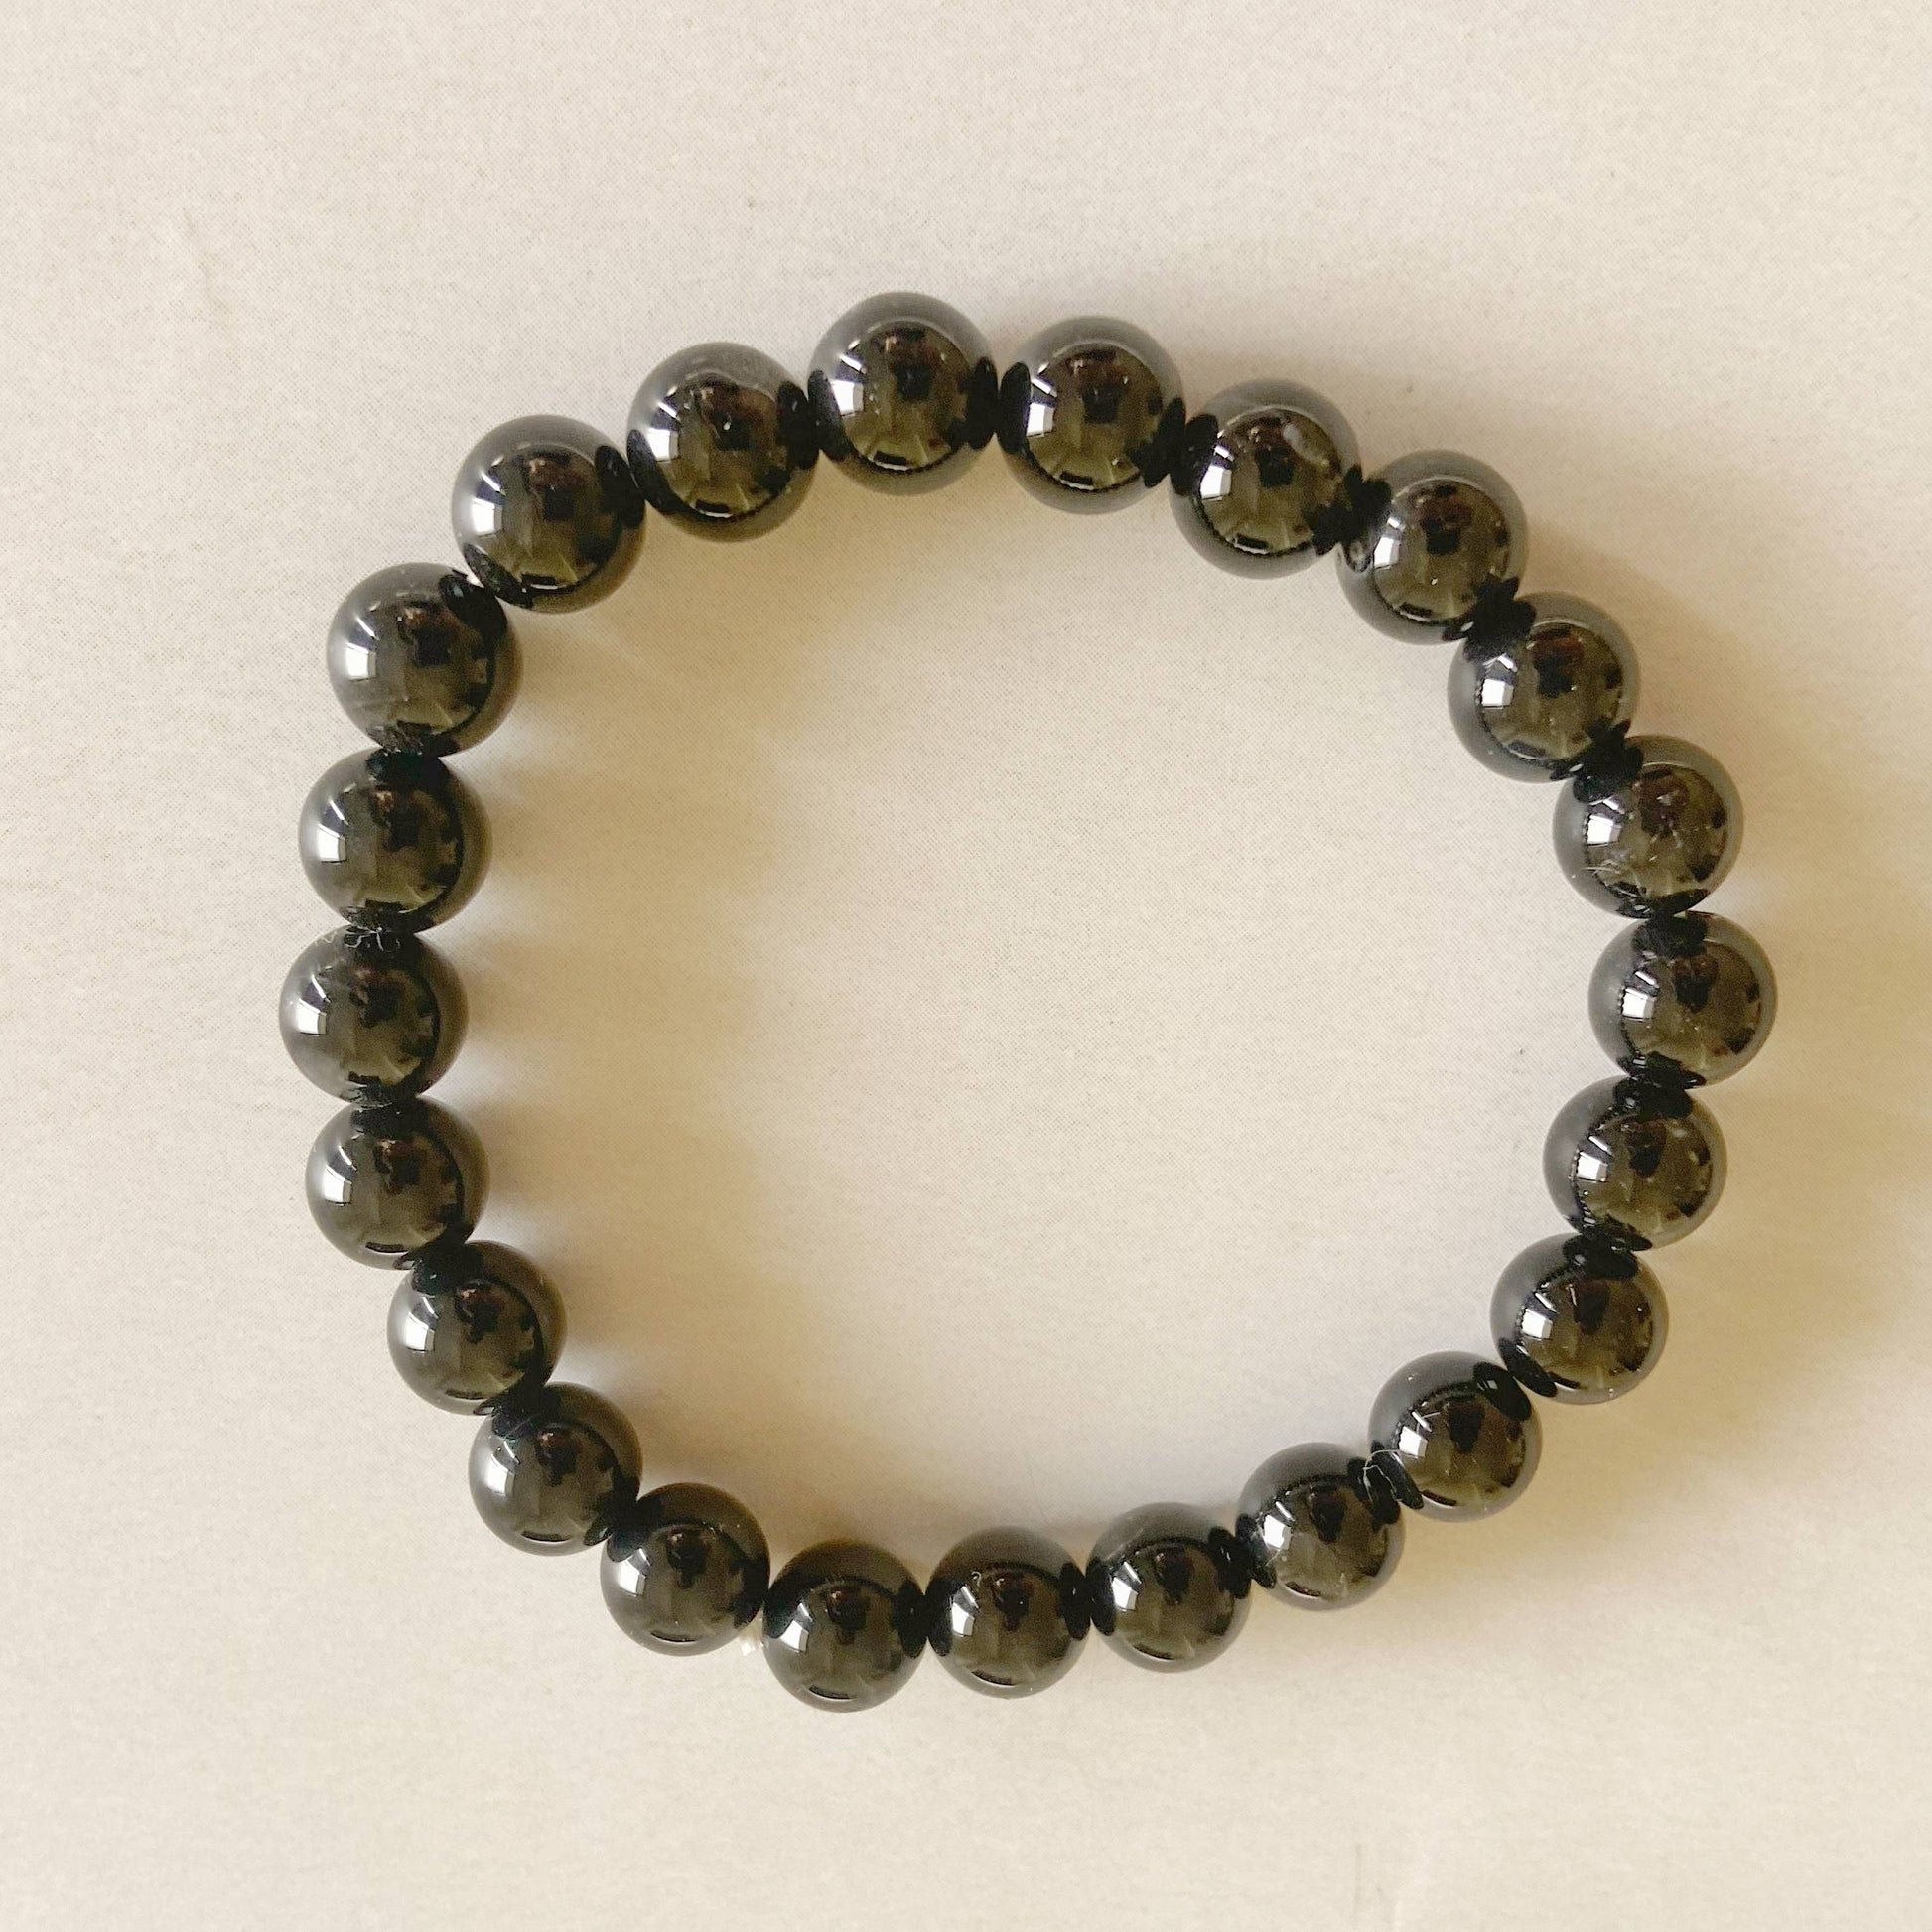 Black Obsidian Bead Bracelet - 8Mm | Removes Blockages & Provides Great Protection Crystal Jewellery